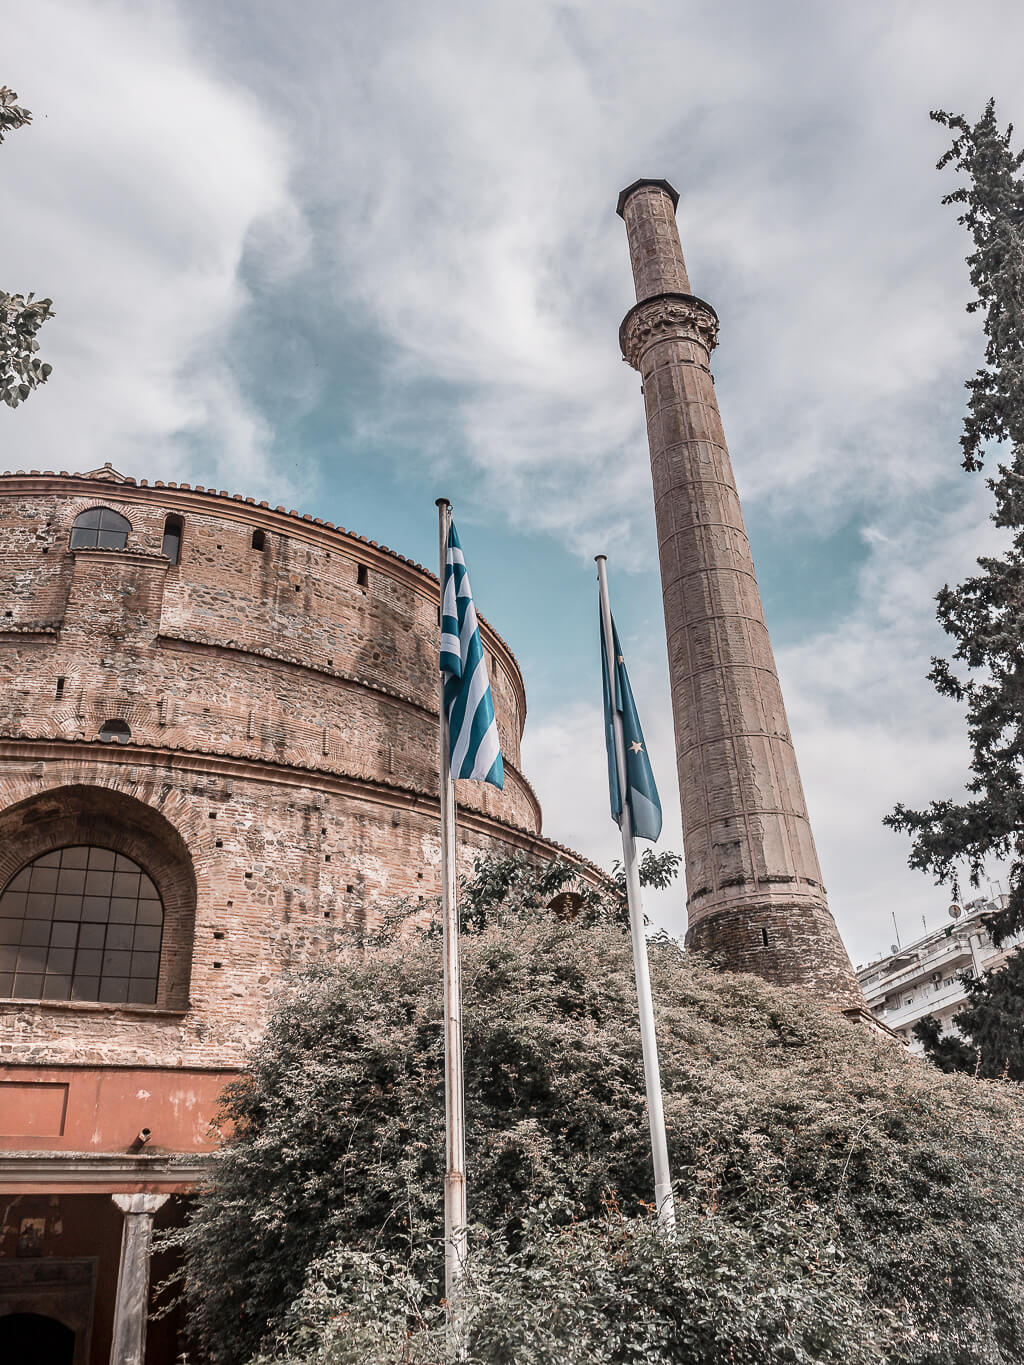 A Guide For Planning A Trip To Thessaloniki - Things to do in the capital of Macedonia {2 day itinerary, including food & restaurants tips, shopping and sightseeing}